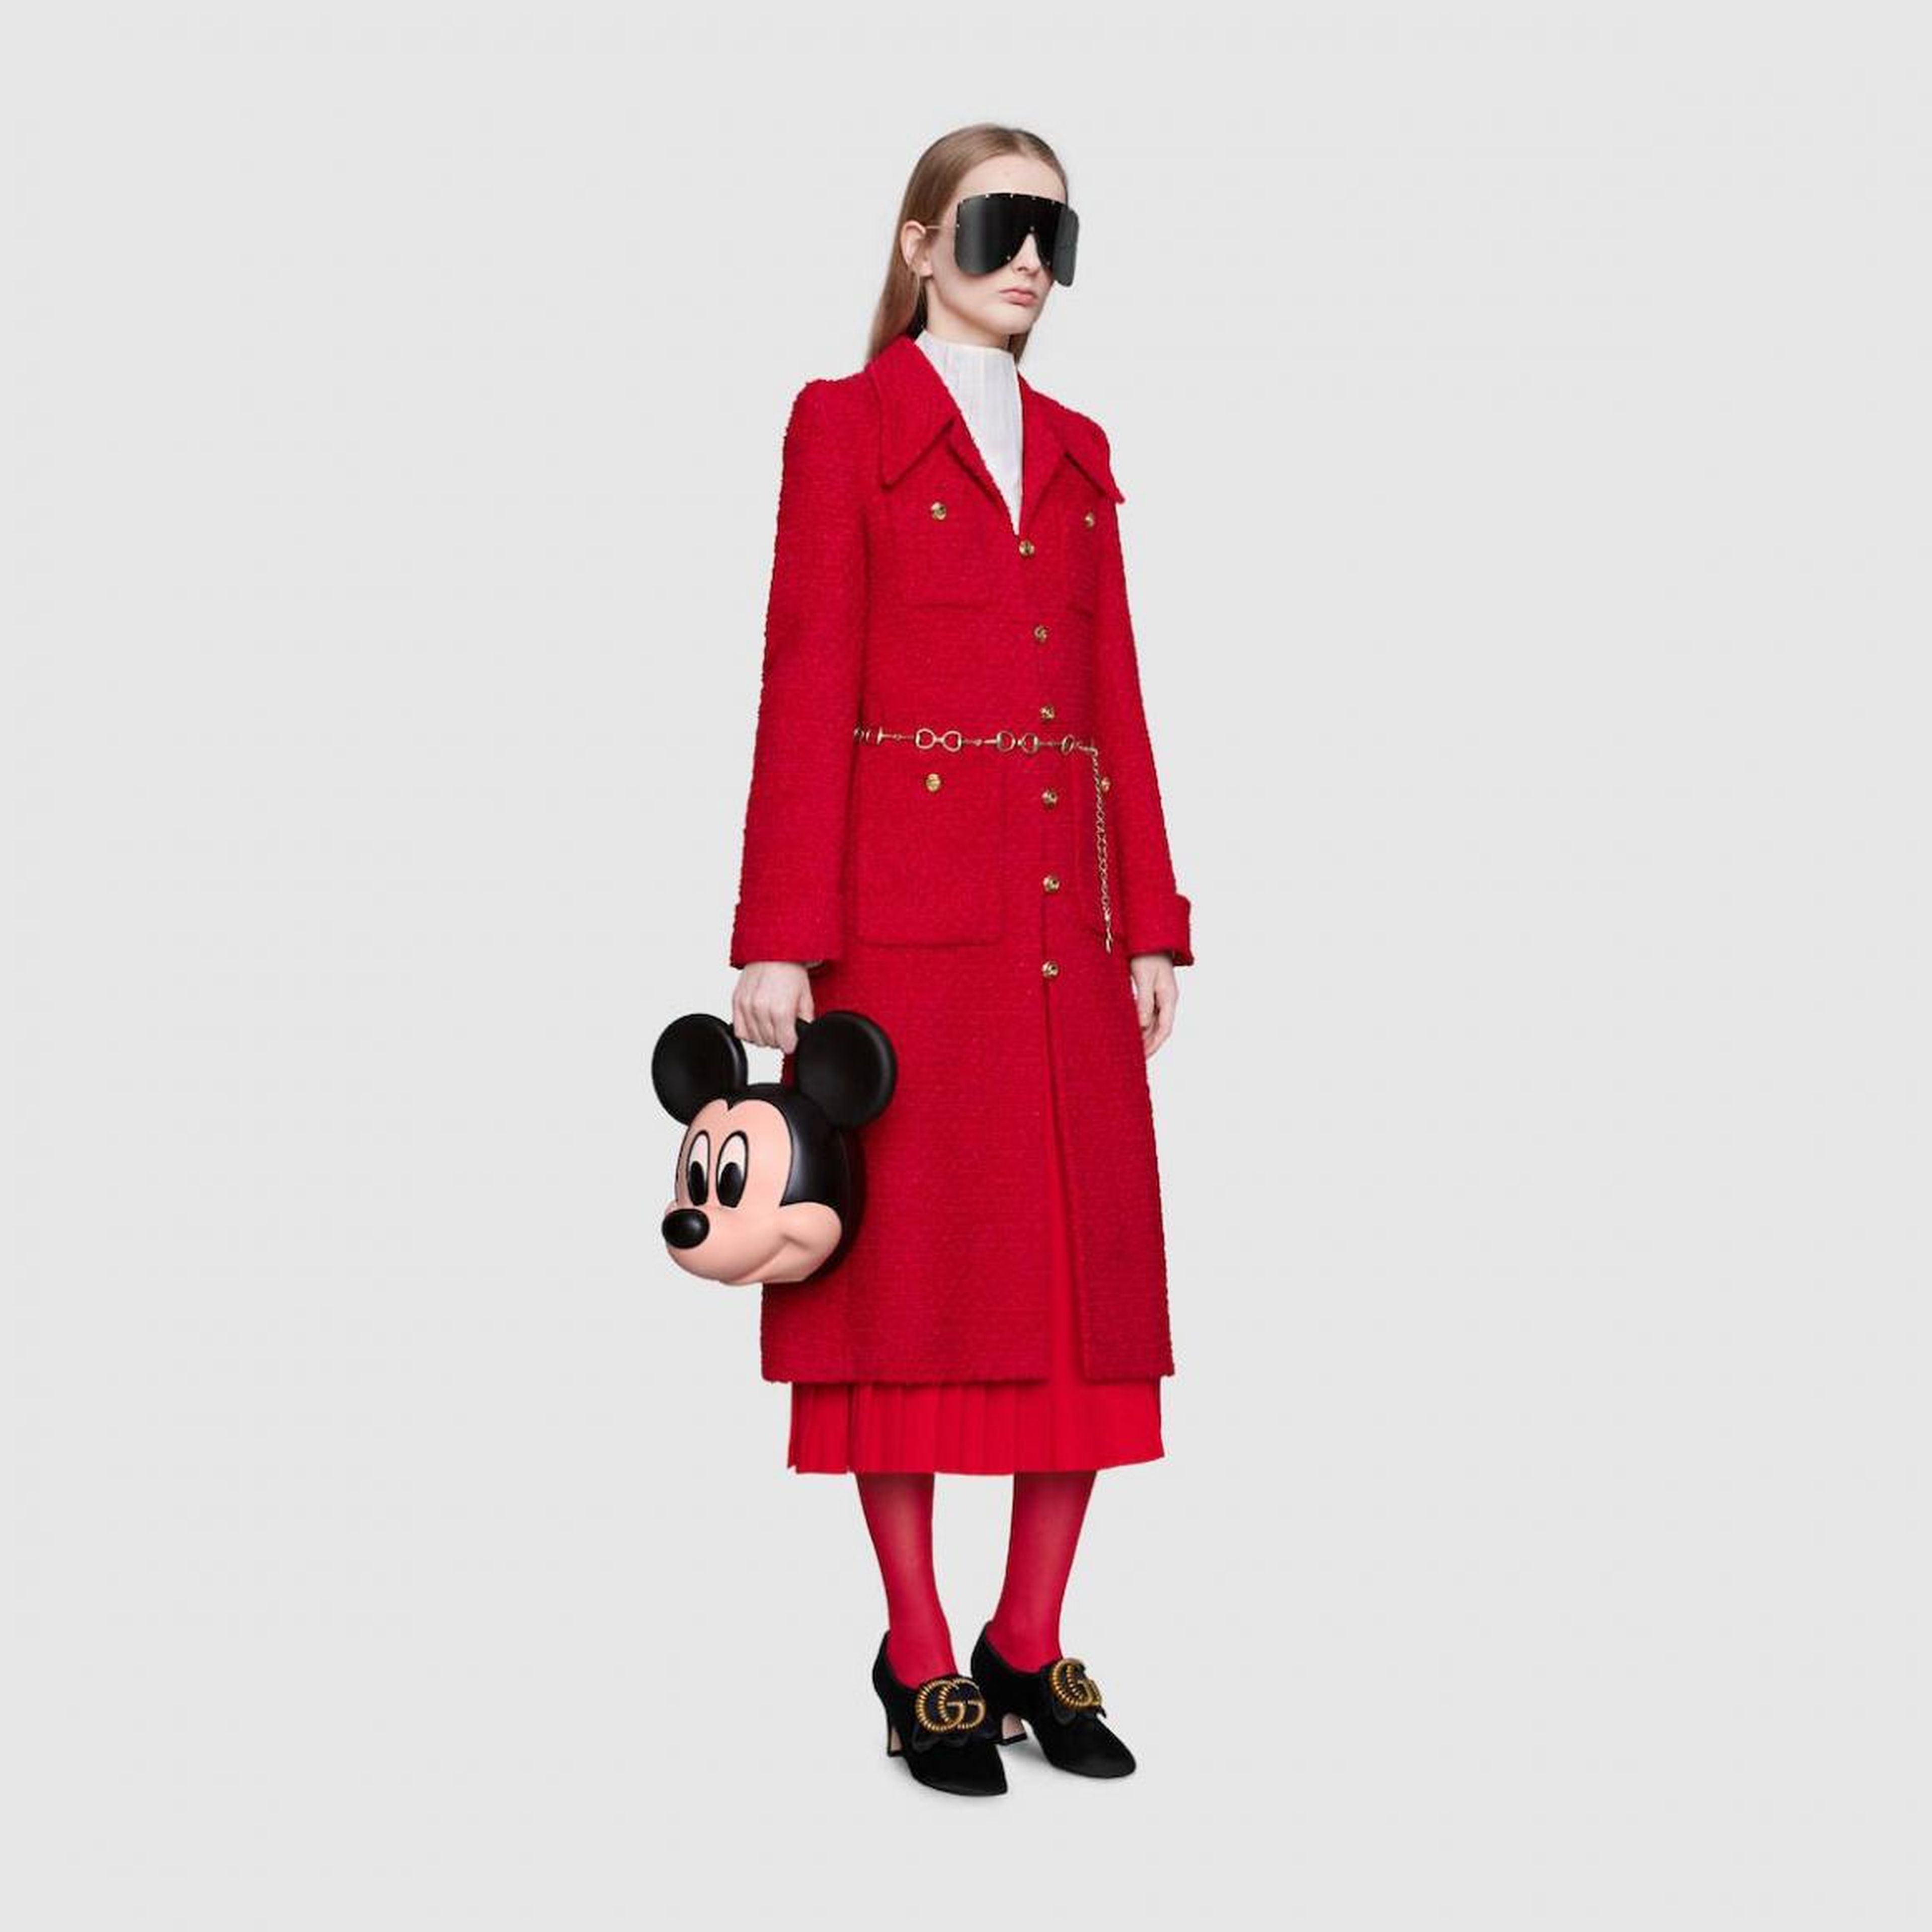 Gucci's 3D-printed Mickey Mouse bag.